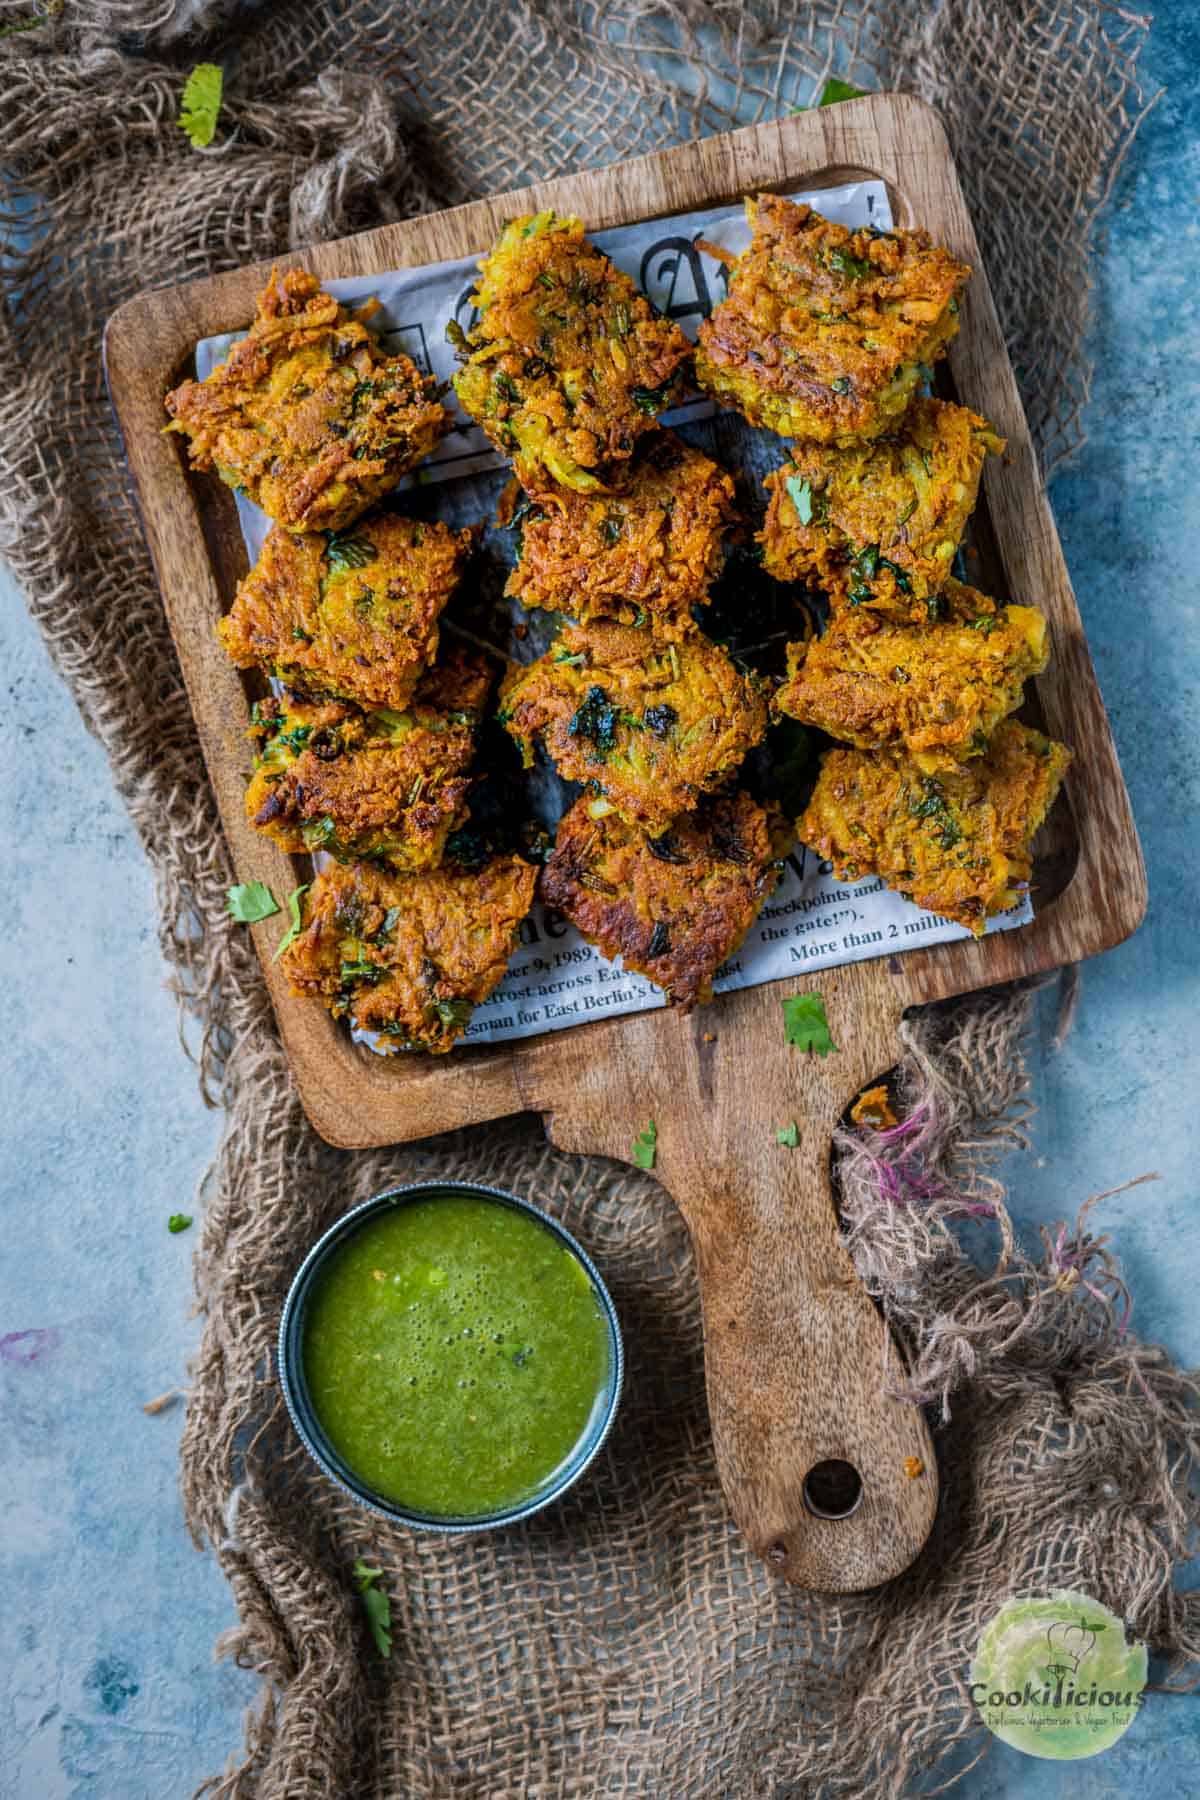 Fried Besan Potato Squares arranged in a wooden platter with green chutney on the side